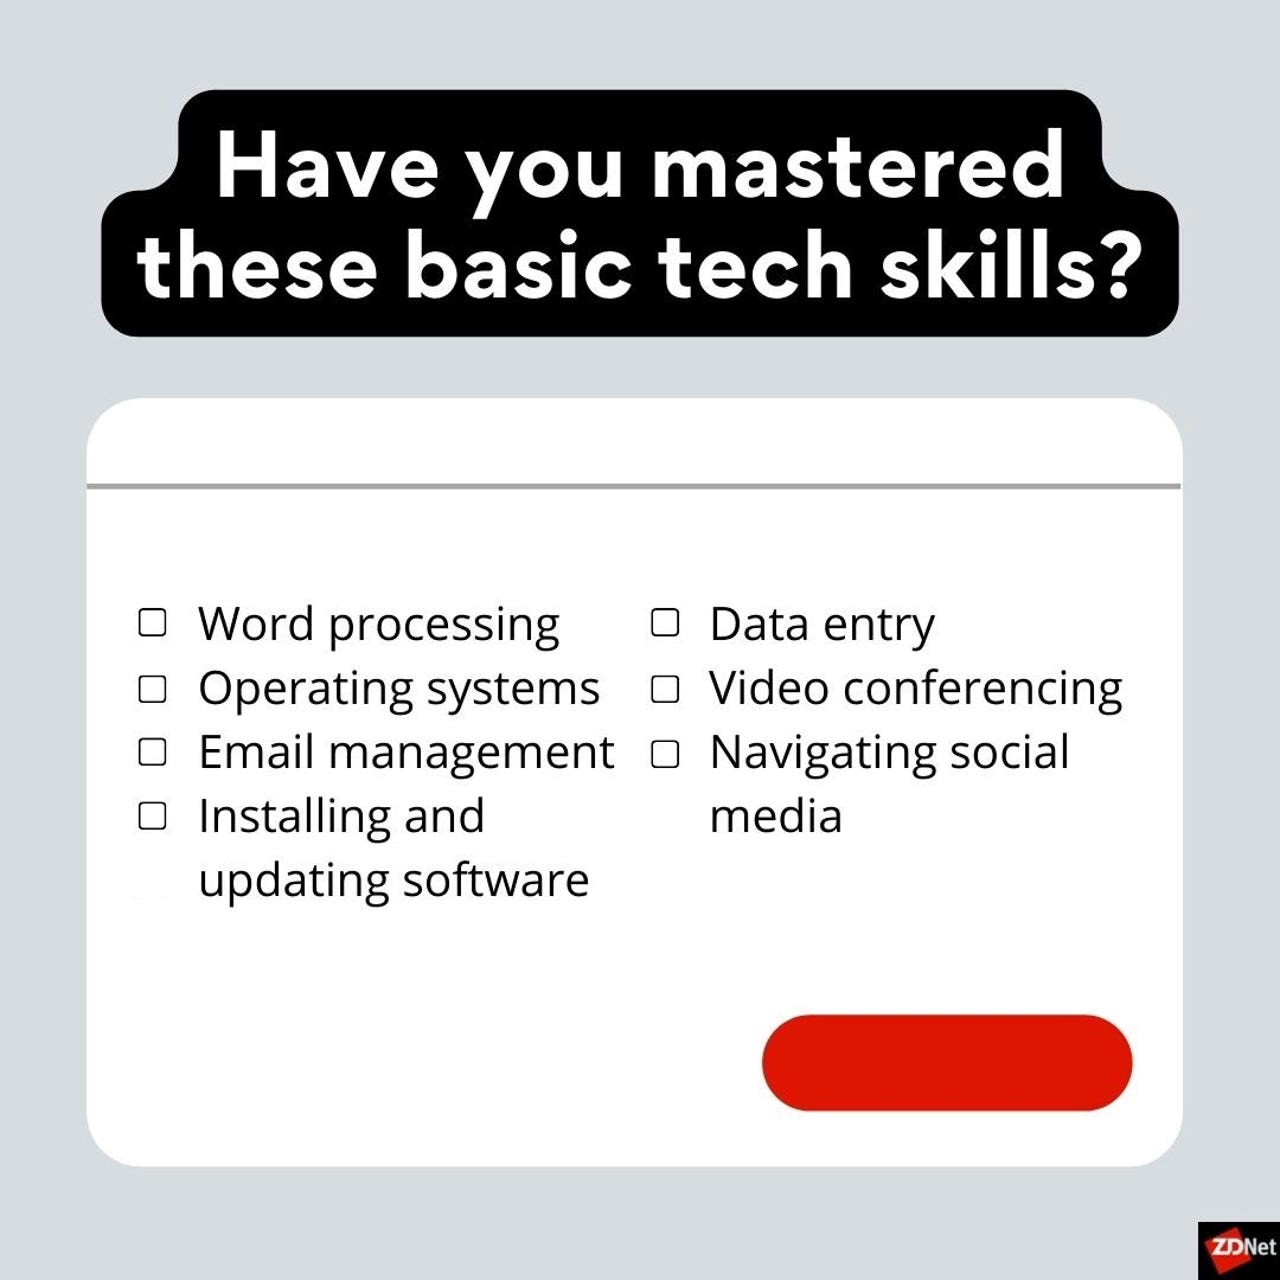 Graphic listing basic tech skills, including: Word processing, operating systems, email management, installing and updating software, data entry, video conferencing, and navigating social media.